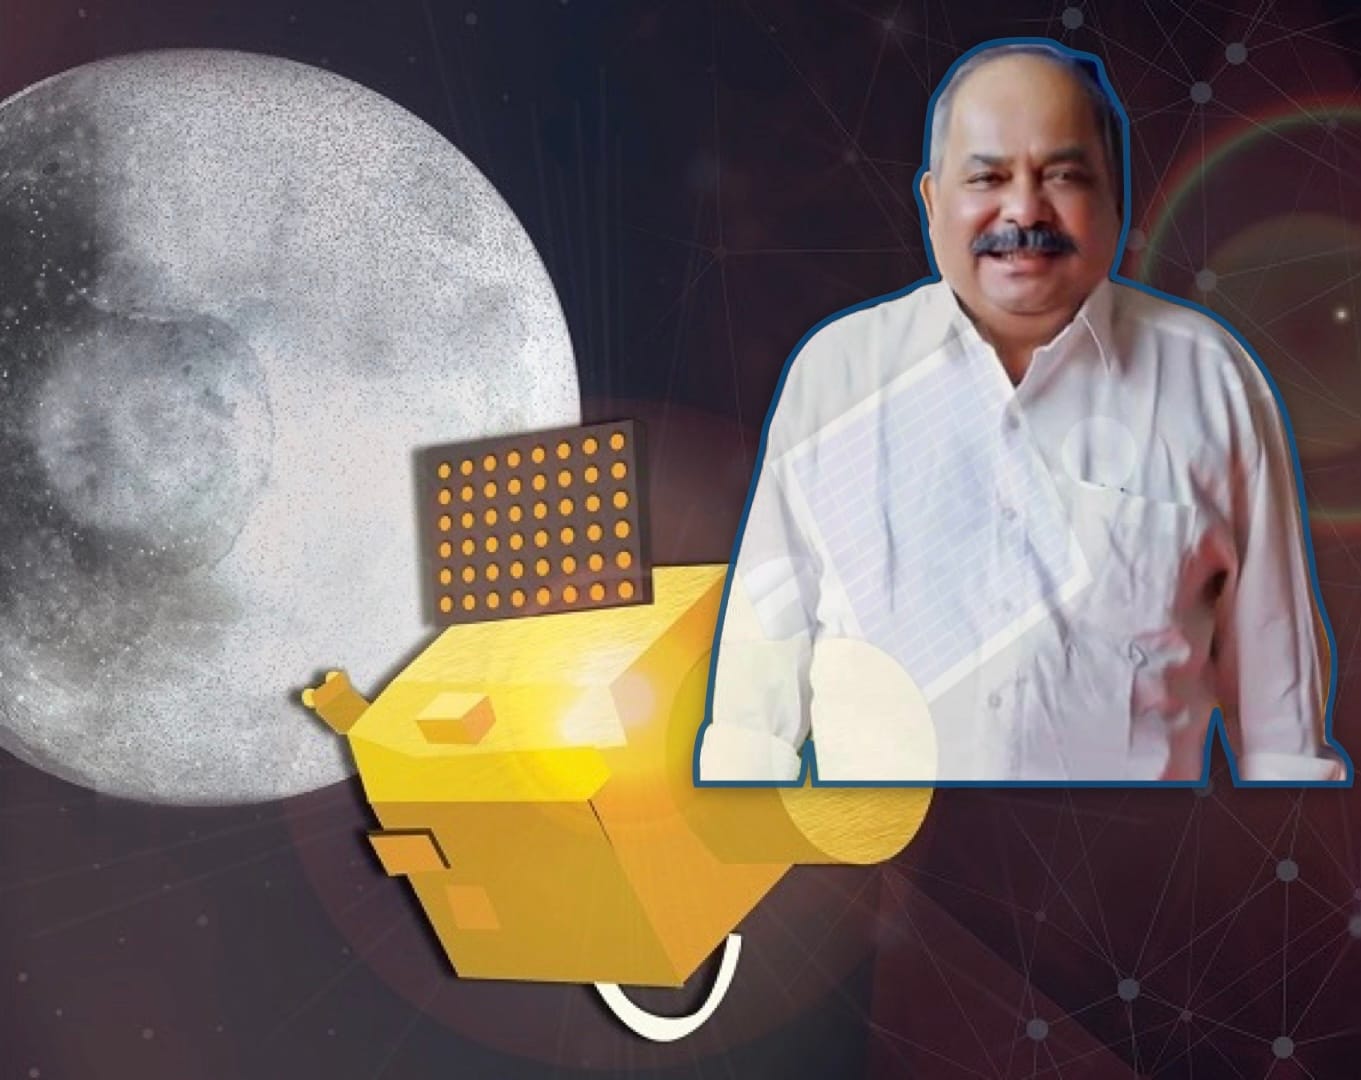 Mission Director of India’s Chandrayaan 1 lunar orbiter has passed away